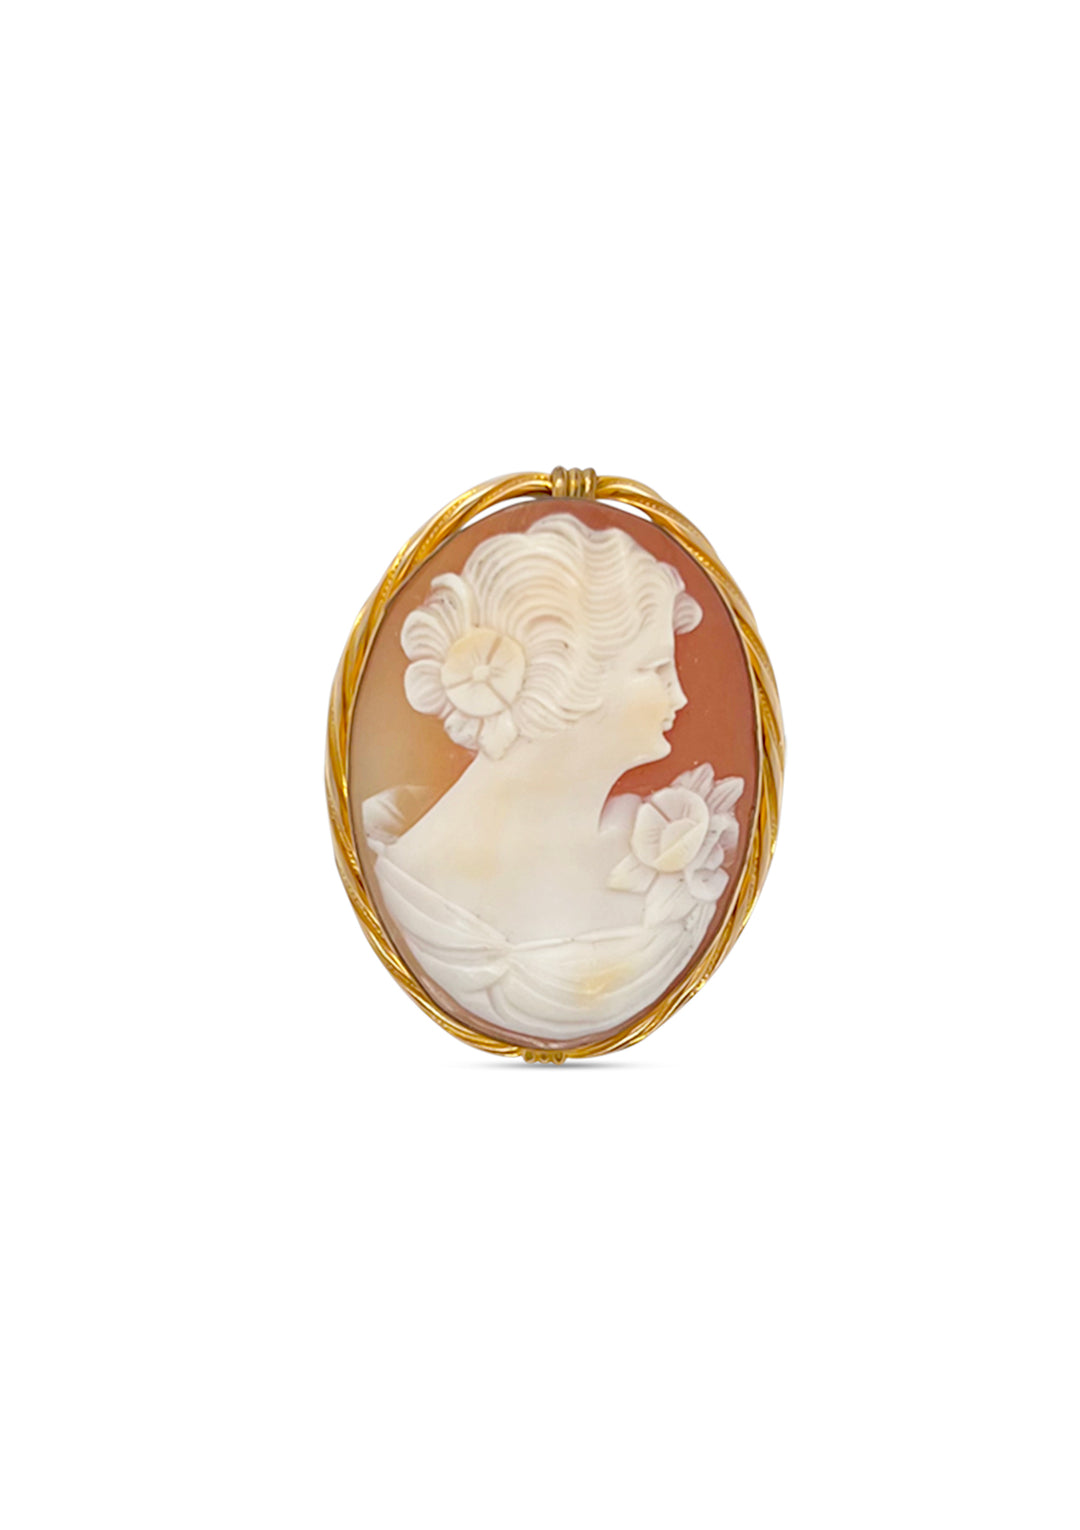 10K Yellow Gold Shell Cameo Brooch